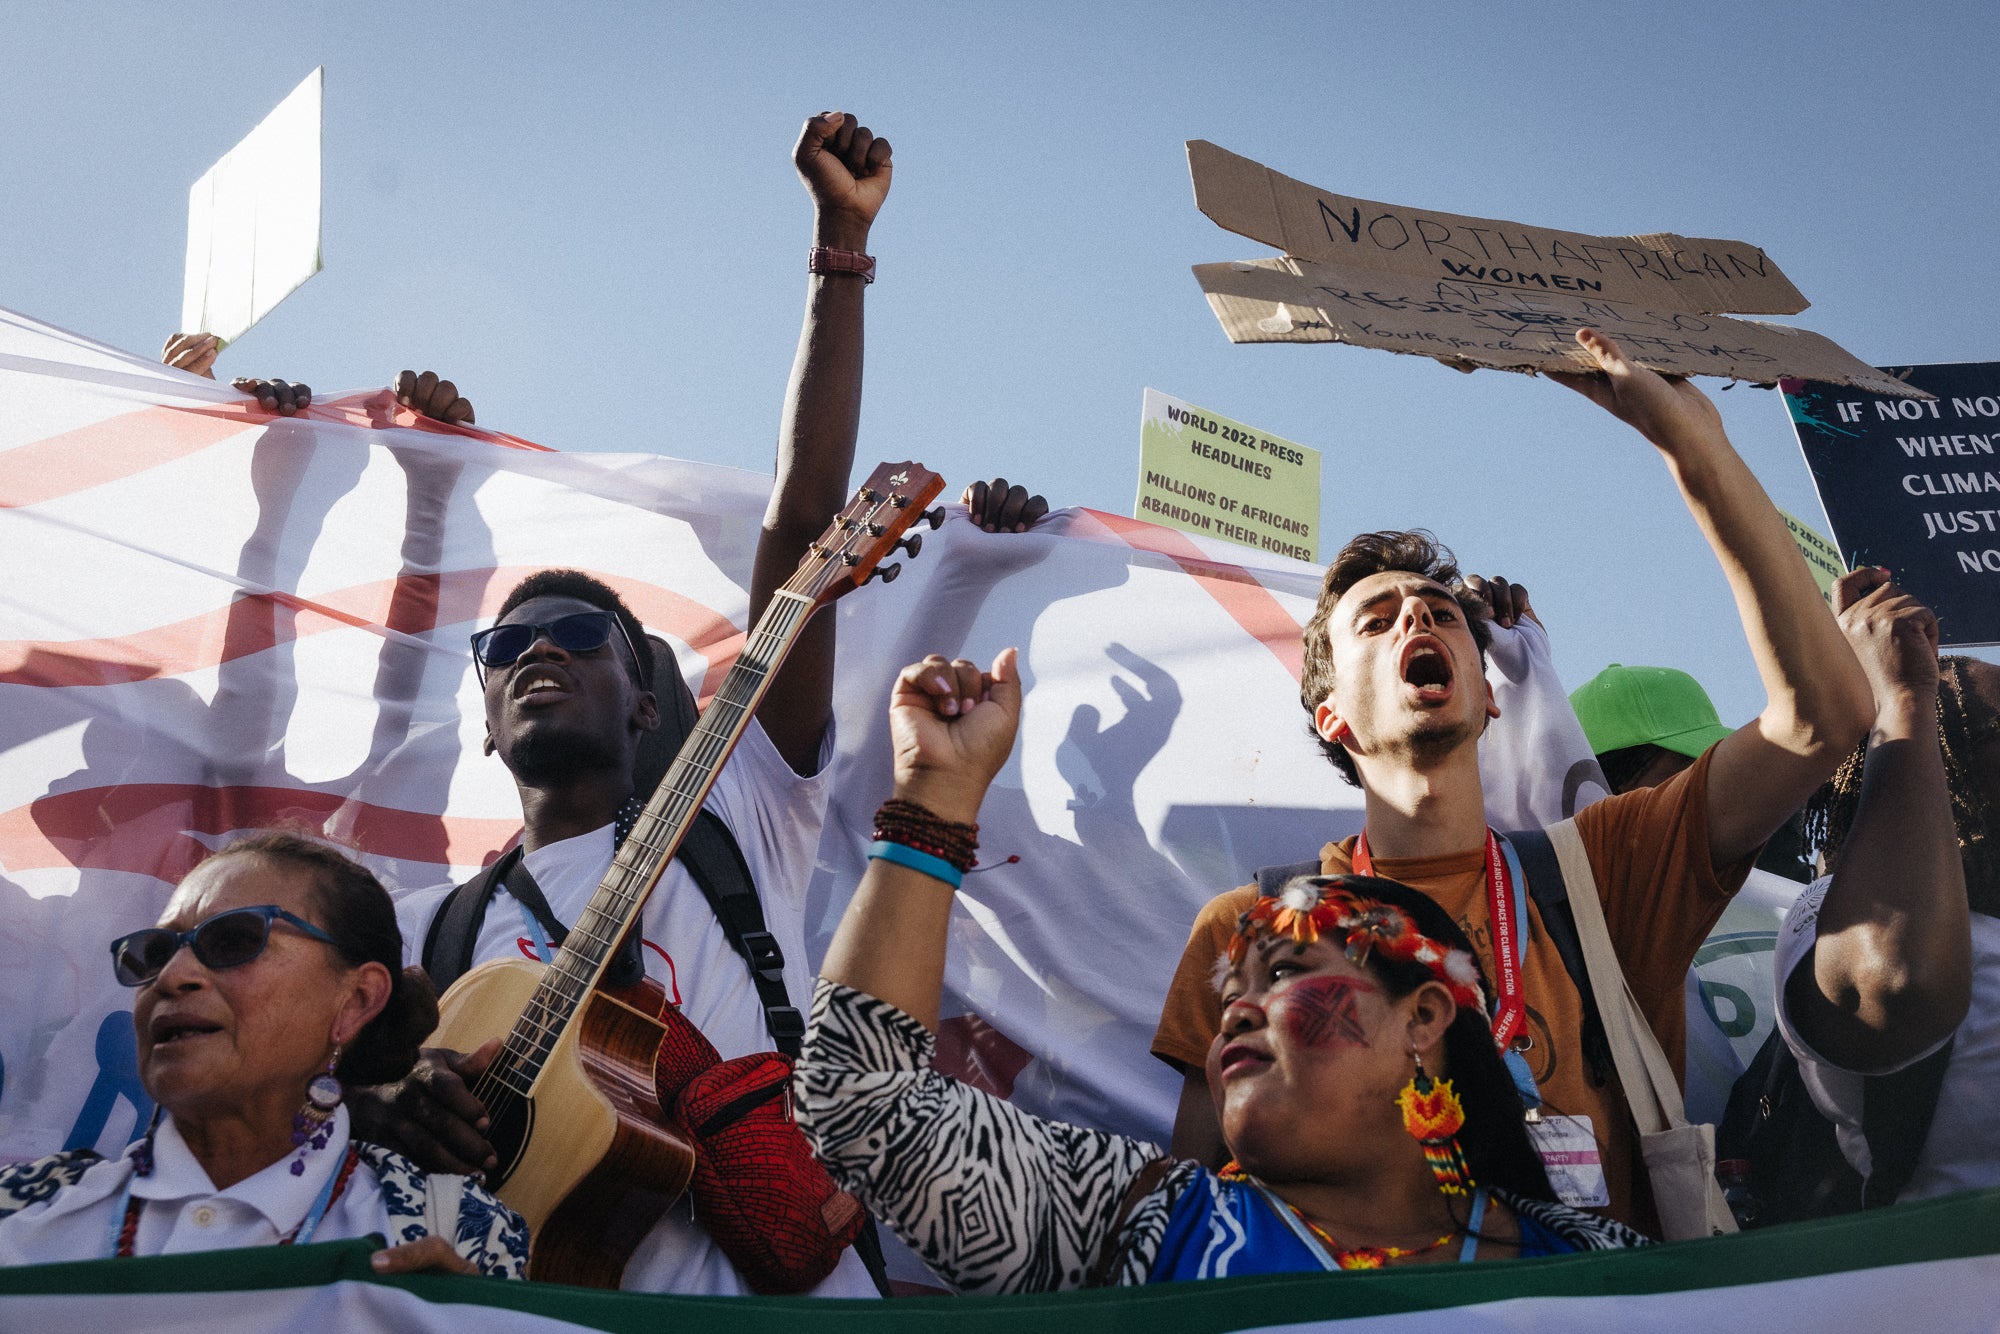 Changemakers call for climate justice, human rights, and the end of fossil fuels during the 2022 United Nations Climate Change Conference, in Sharm el-Sheikh, Egypt.